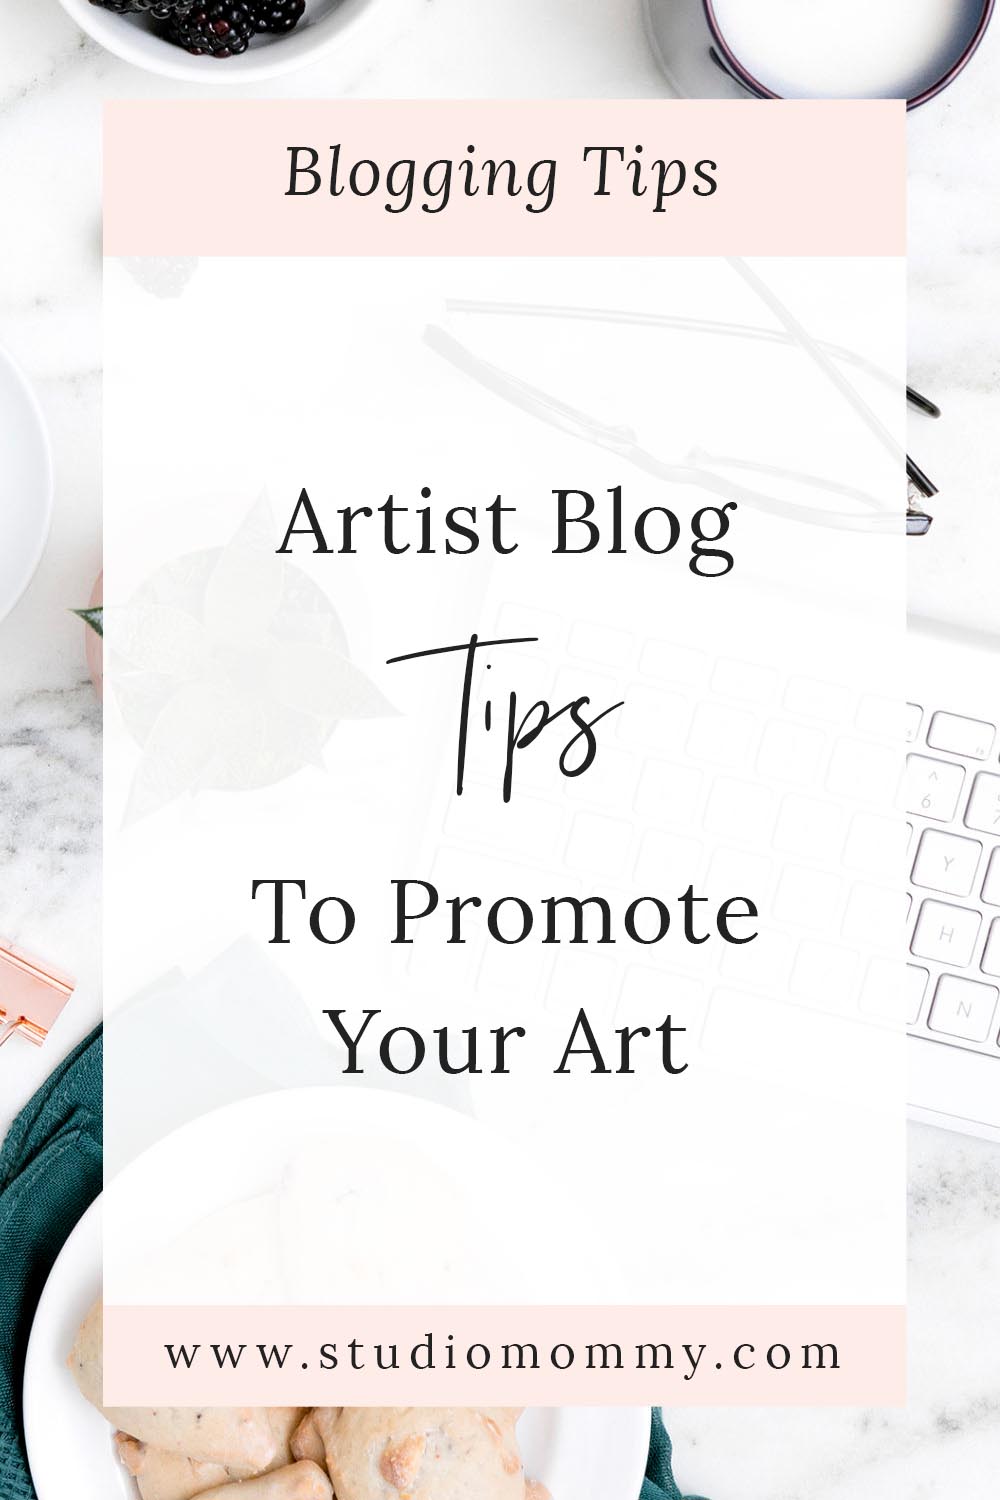 Websites and blogs are a great way to get your art out there and introduce your creativity to the world. Most blog platforms are simple to create and a cinch to post to and update. How exactly do you create an artist blog, though? Also, how do you make sure your readers keep coming back on a regular basis? @studiomommy #artistblog #bloggingartist #marketart